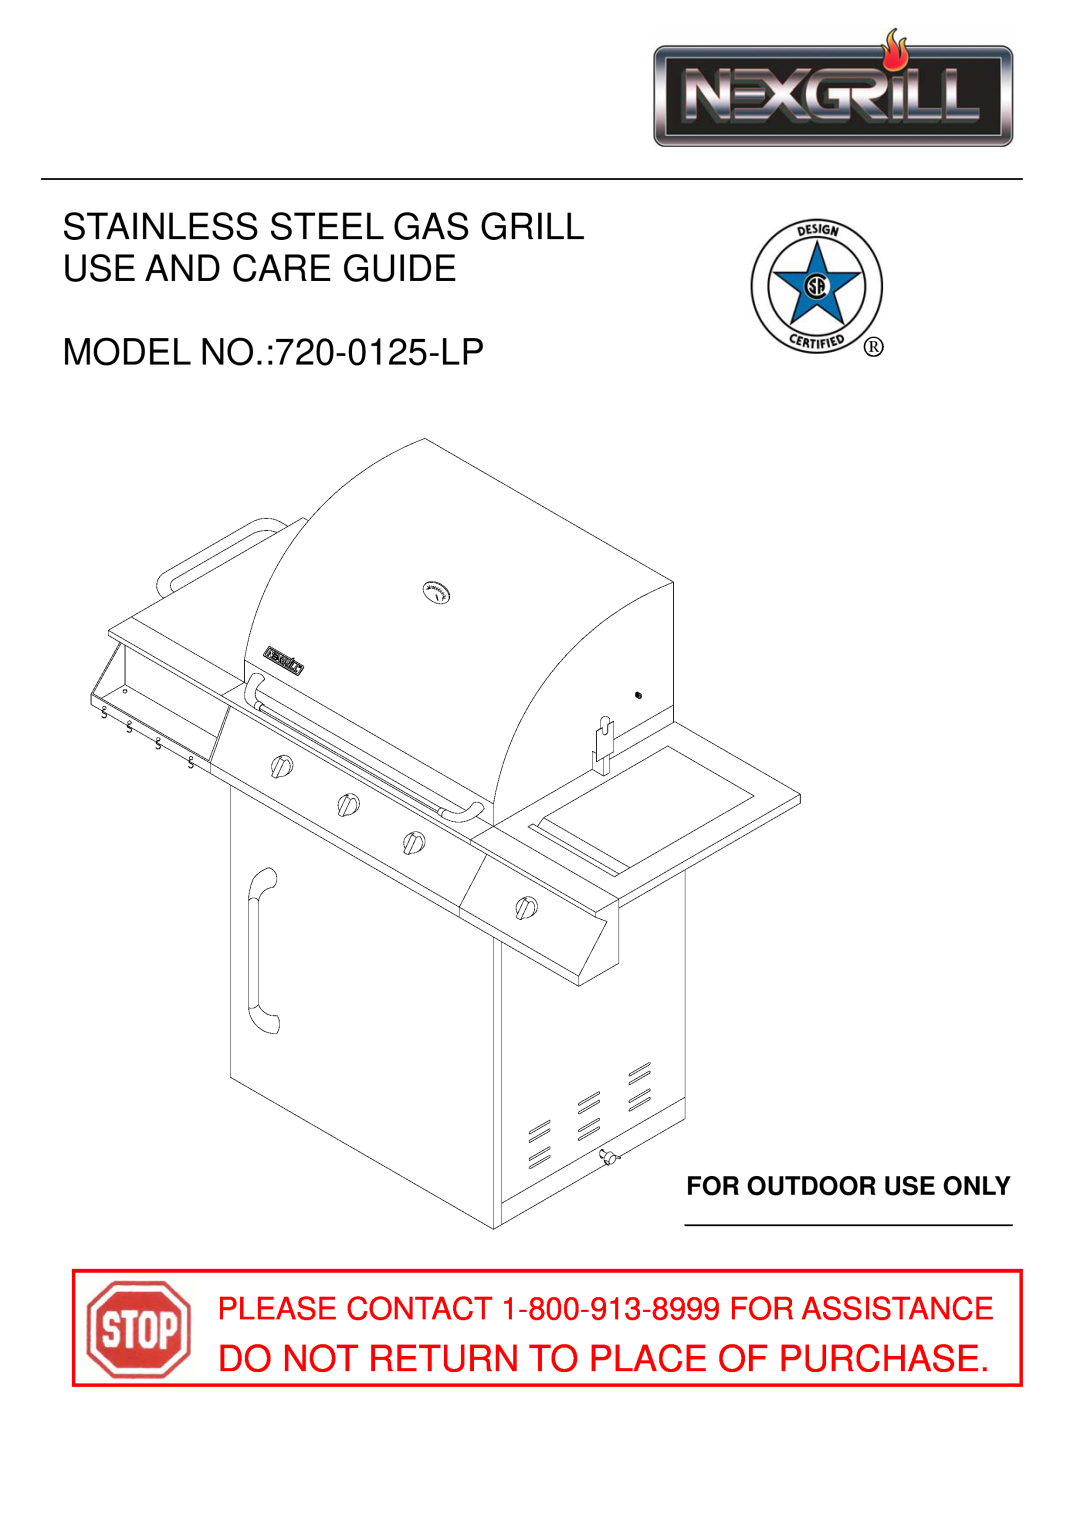 Nexgrill manual Stainless Steel Gas Grill Use And Care Guide, MODEL NO.720-0125-LP, Do Not Return To Place Of Purchase 